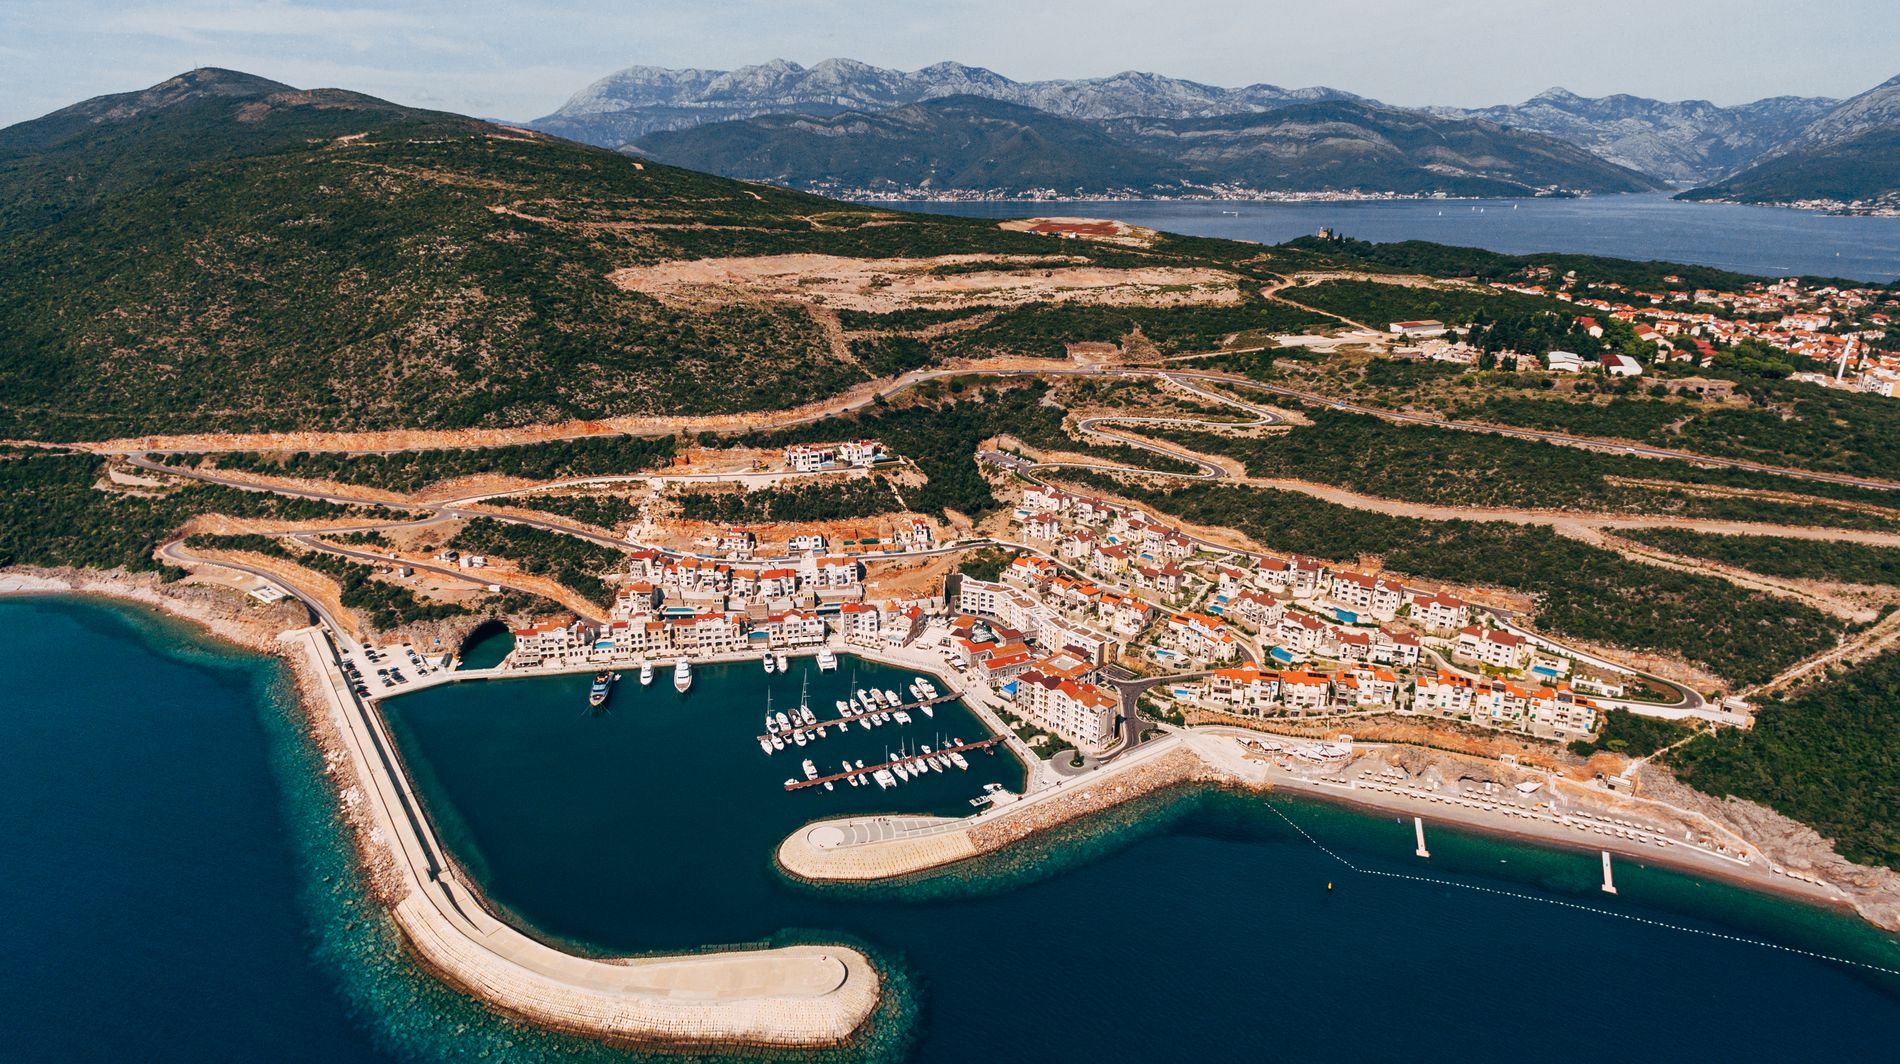 Aerial view to the lustica bay marina